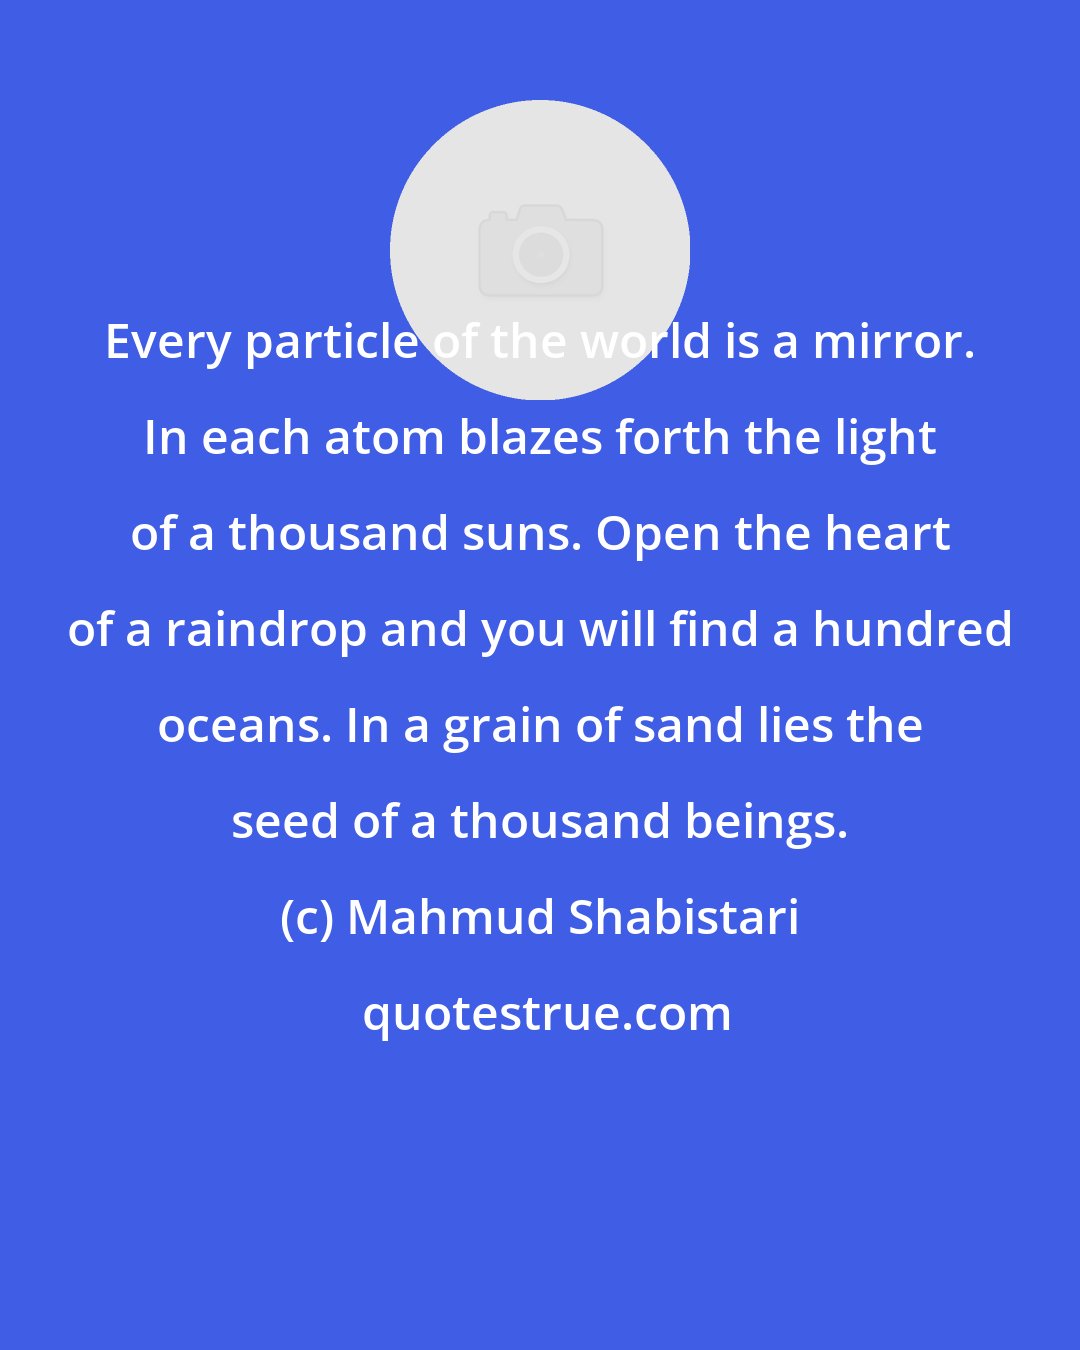 Mahmud Shabistari: Every particle of the world is a mirror. In each atom blazes forth the light of a thousand suns. Open the heart of a raindrop and you will find a hundred oceans. In a grain of sand lies the seed of a thousand beings.